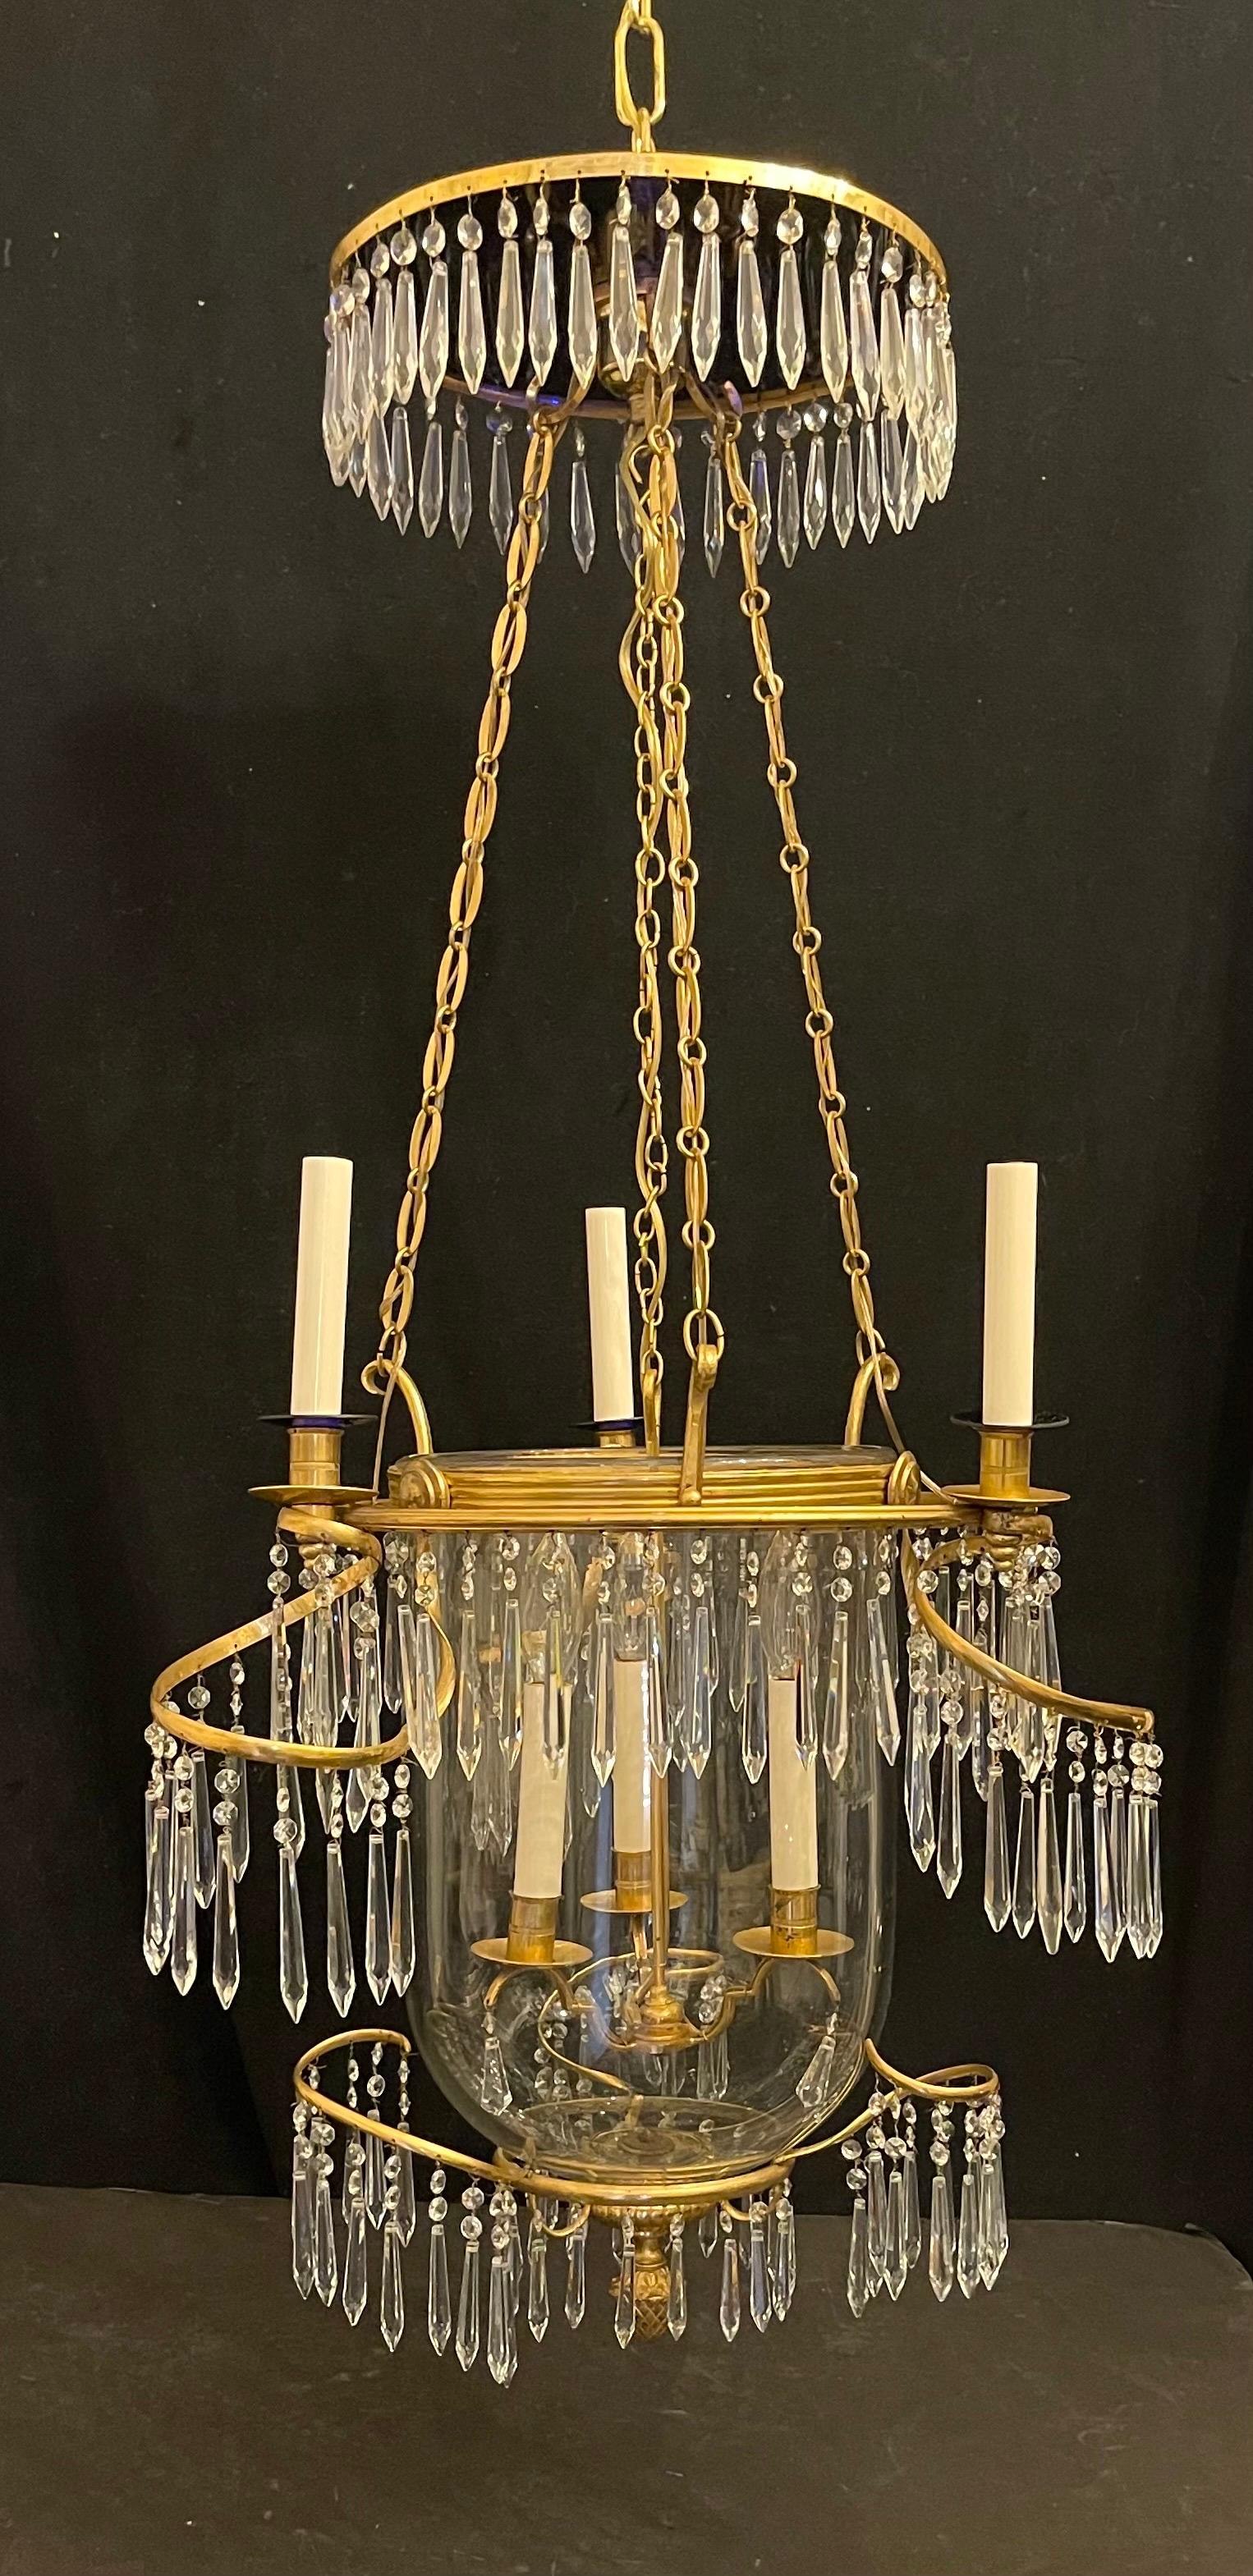 A Wonderful Russian Baltic Cobalt Blue Glass And Crystal Ormolu With Bronze Cage This Beautiful Neoclassical  Lantern Chandelier Fixture With 3 Candelabra Internal Lights And 3 External Candelabra Lights.
Completely Rewired For US And Accompanied By